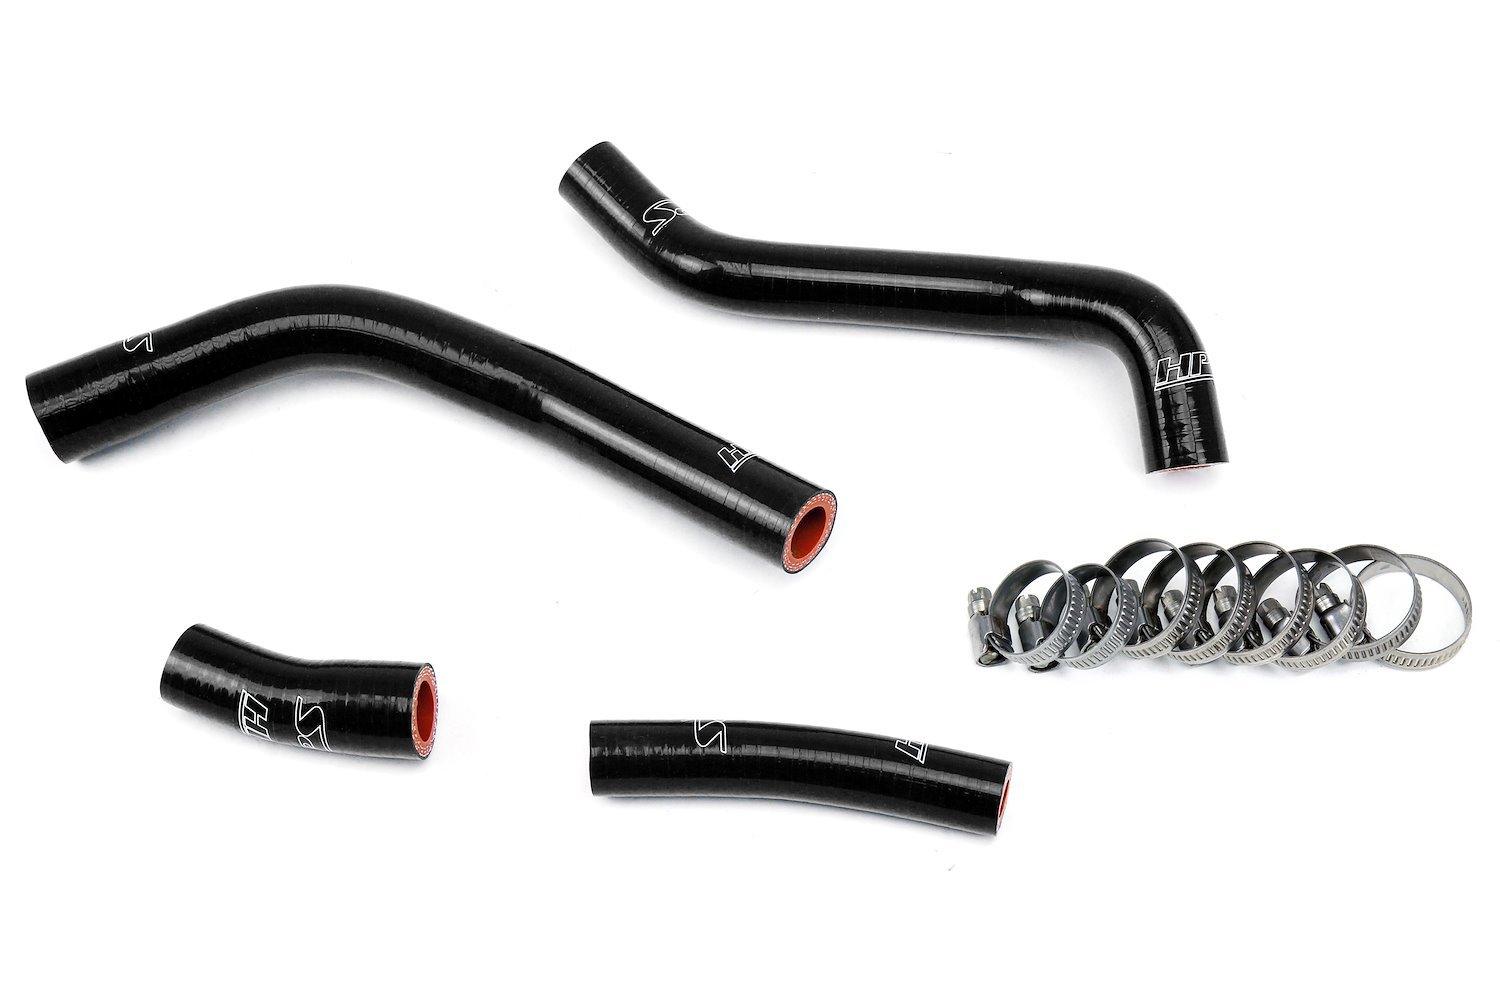 57-1757-BLK Radiator Hose Kit, 3-Ply Reinforced Silicone, Replaces Rubber Radiator Coolant Hoses